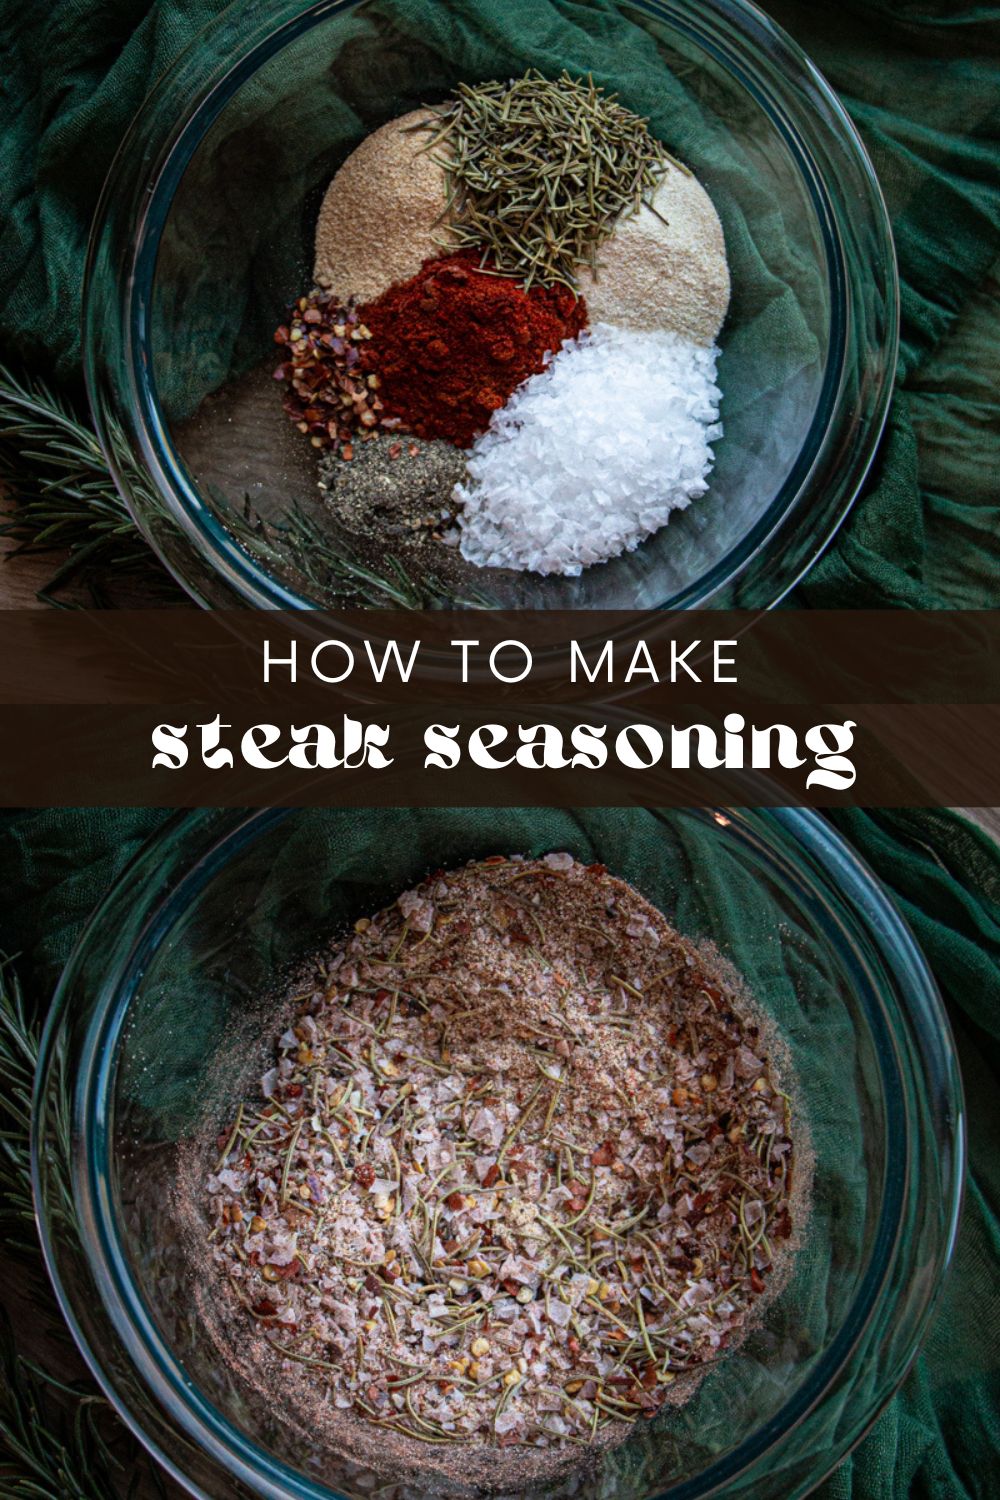 Take your steak to the next level with this easy steak seasoning recipe! This delicious blend of herbs and spices is the easiest way to get steakhouse-level flavor at home. No matter what type of steak you're cooking, this homemade steak seasoning will make it taste even better!